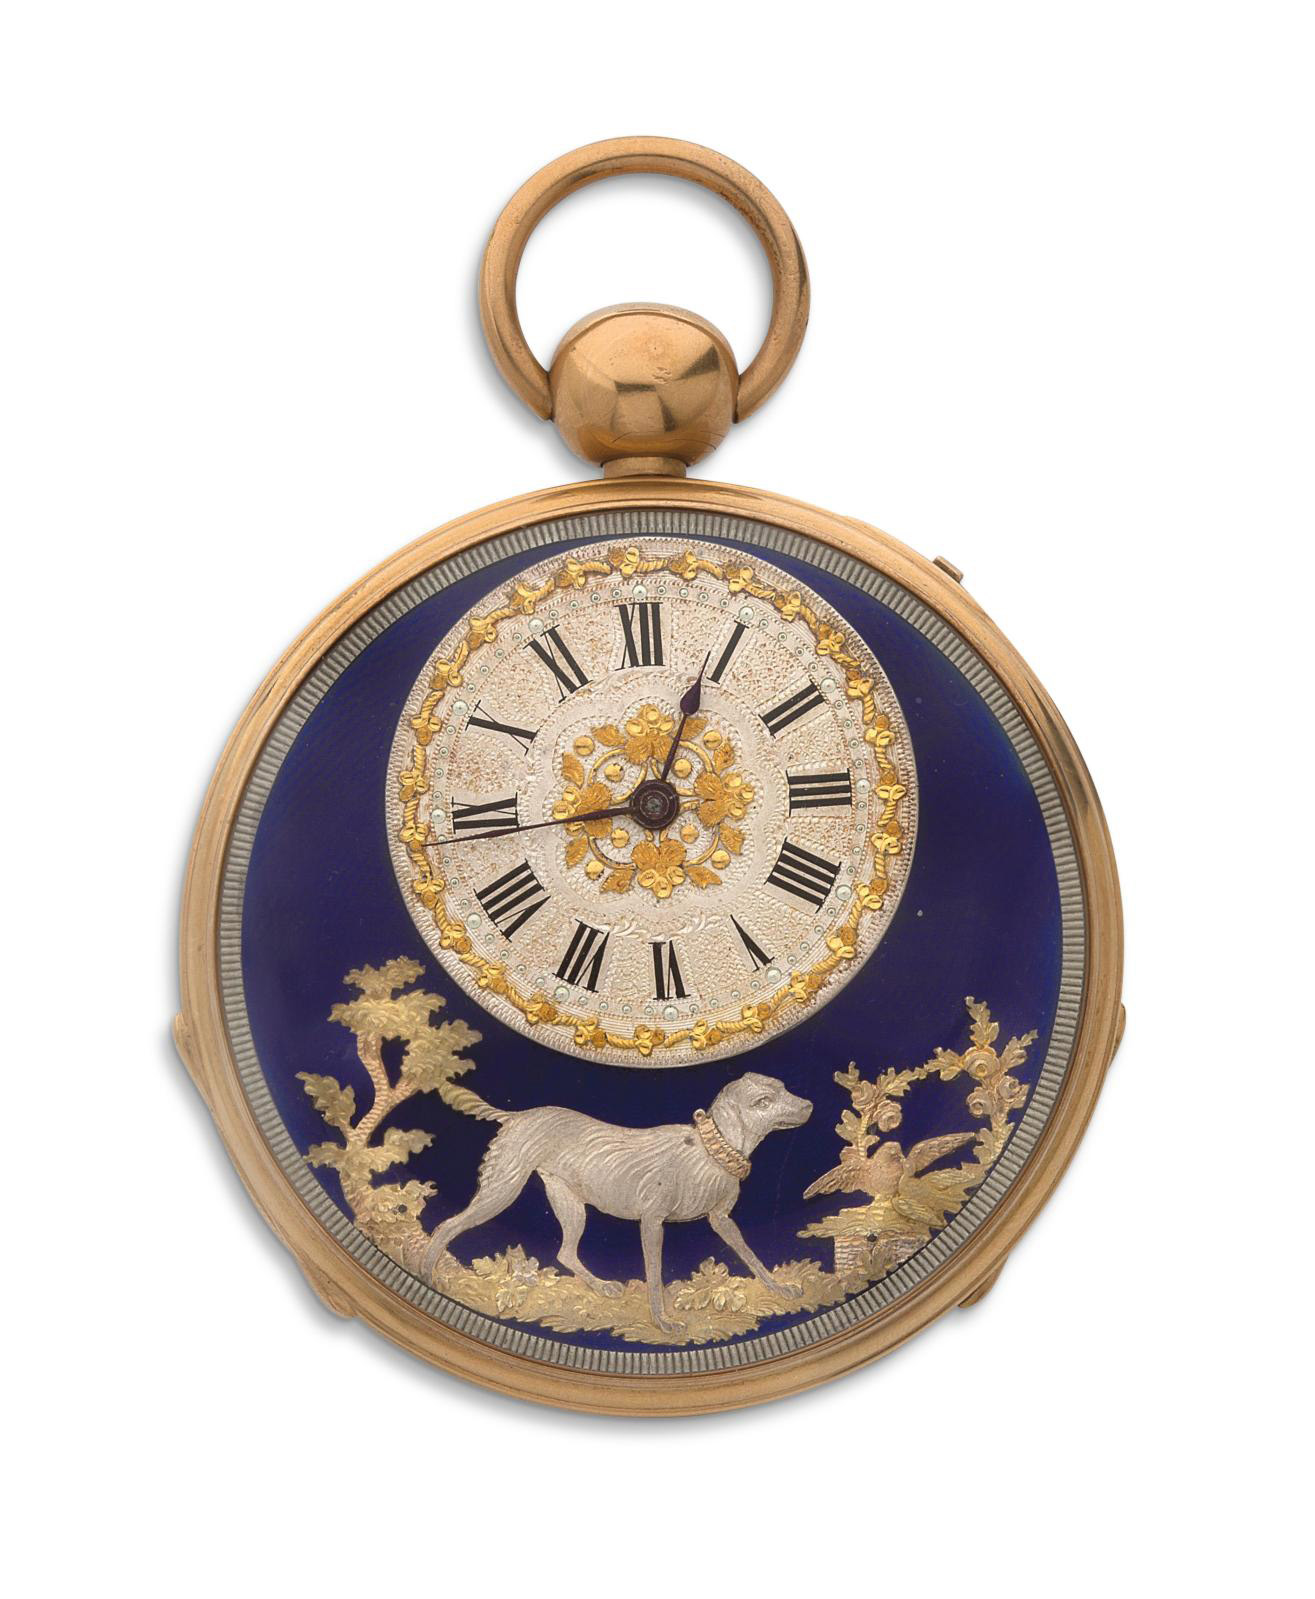 Swiss work attributed to Piguet Meylan, early 19th century, gold watch with chimes, an automaton dog moving its head and reproducing the s